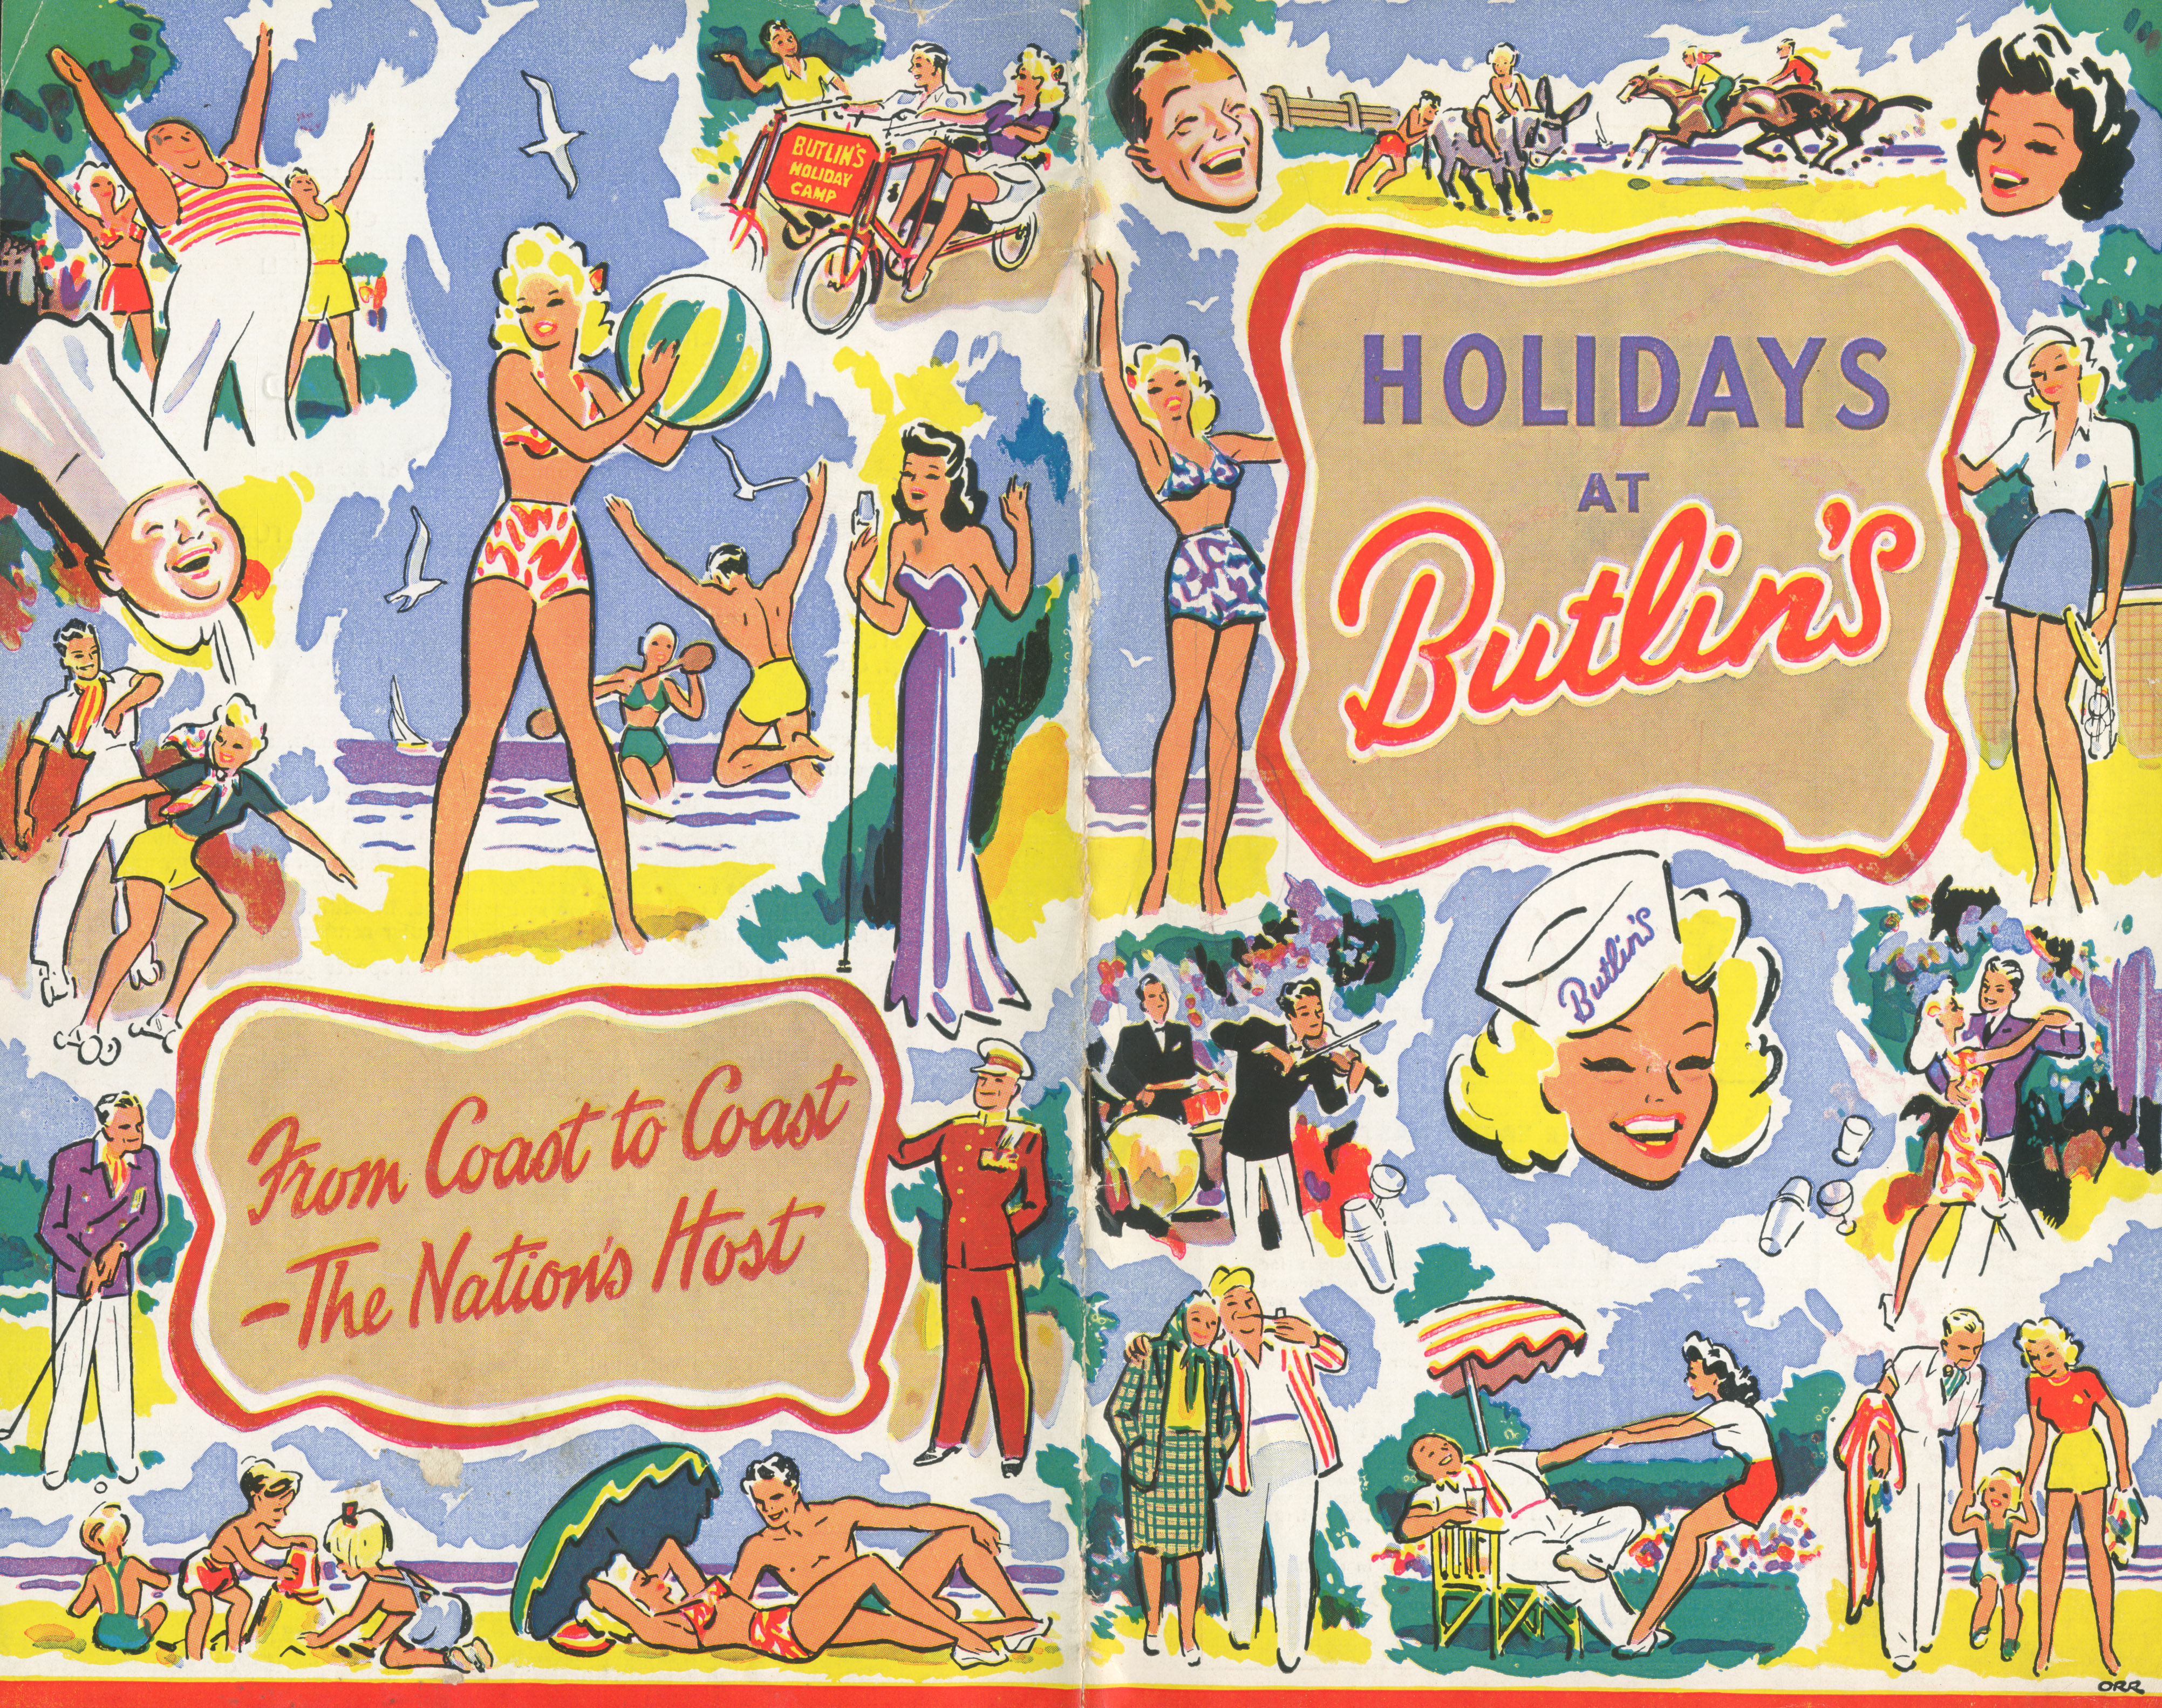 Butlin's The Nation's Host: The Story of the British Seaside